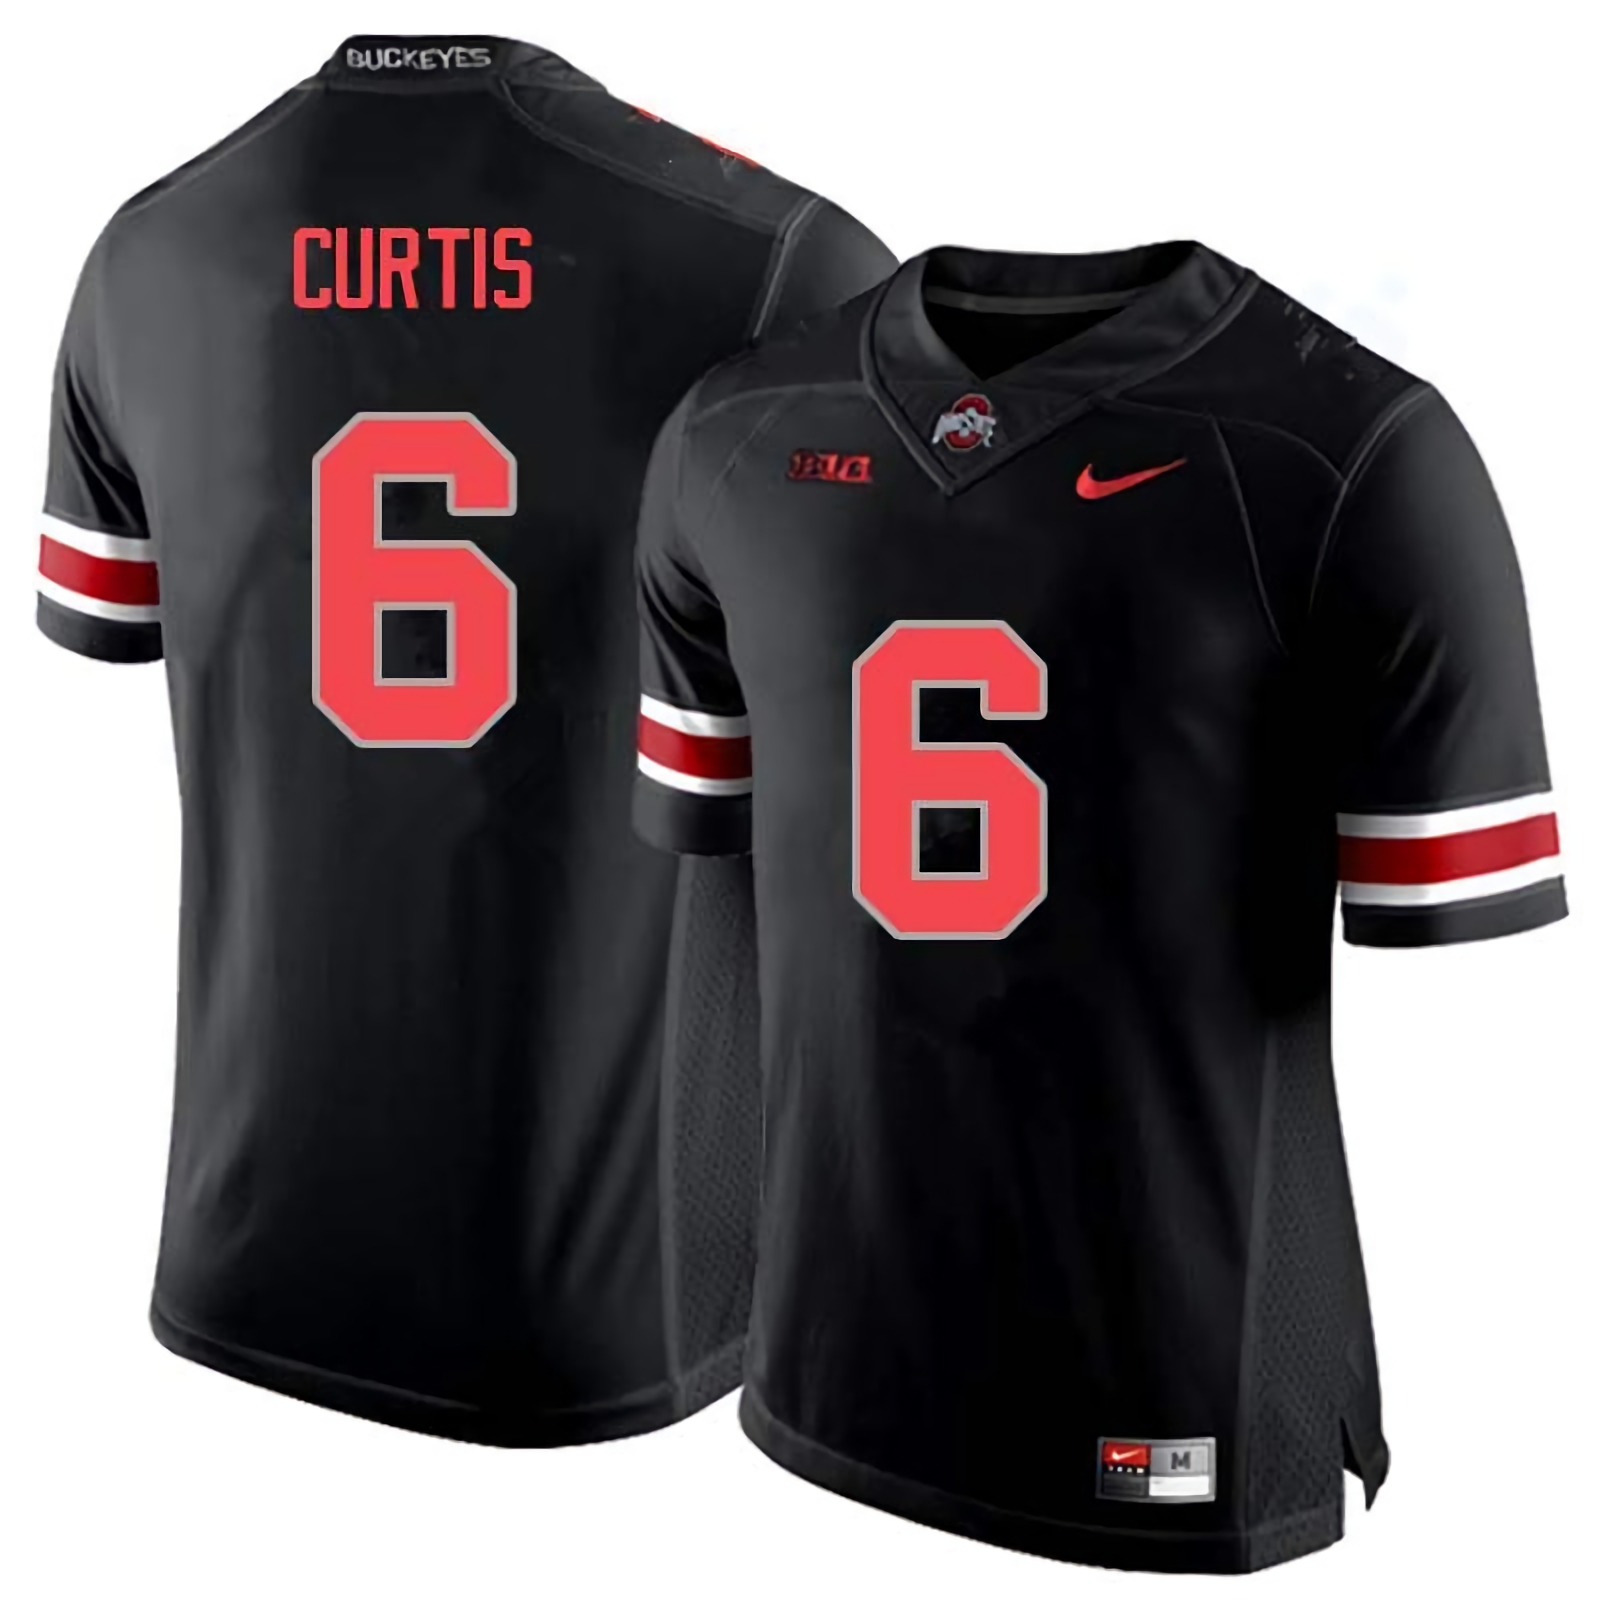 Kory Curtis Ohio State Buckeyes Men's NCAA #6 Nike Blackout College Stitched Football Jersey BUZ8056UE